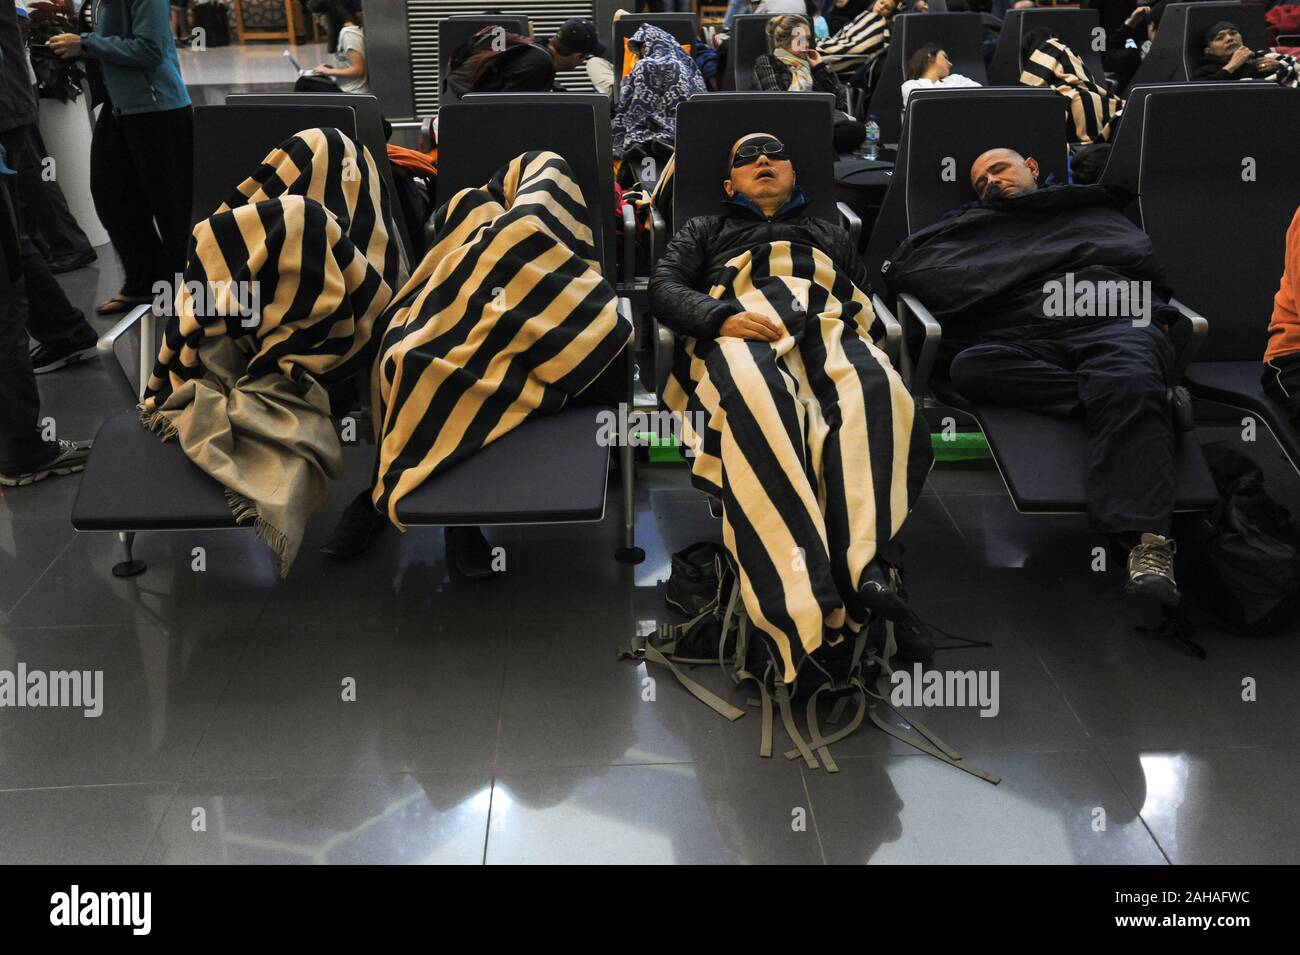 04.01.2014, Abu Dhabi, , United Arab Emirates - Sleeping passengers will wait for their connecting flights in the transit hall at the international ai Stock Photo